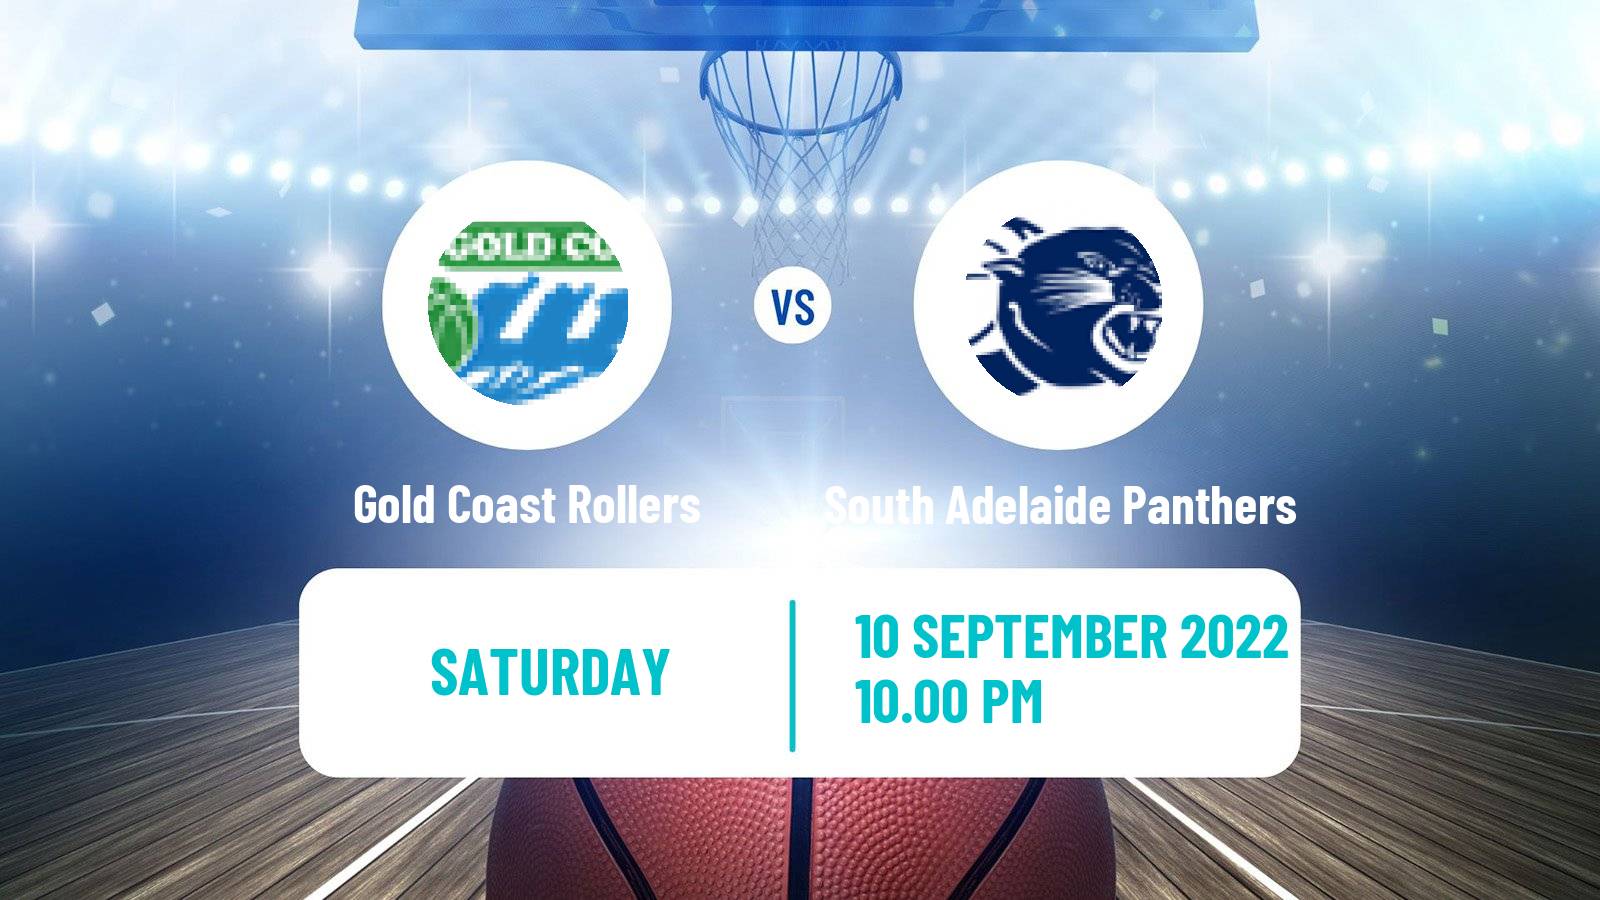 Basketball Australian NBL1 Gold Coast Rollers - South Adelaide Panthers